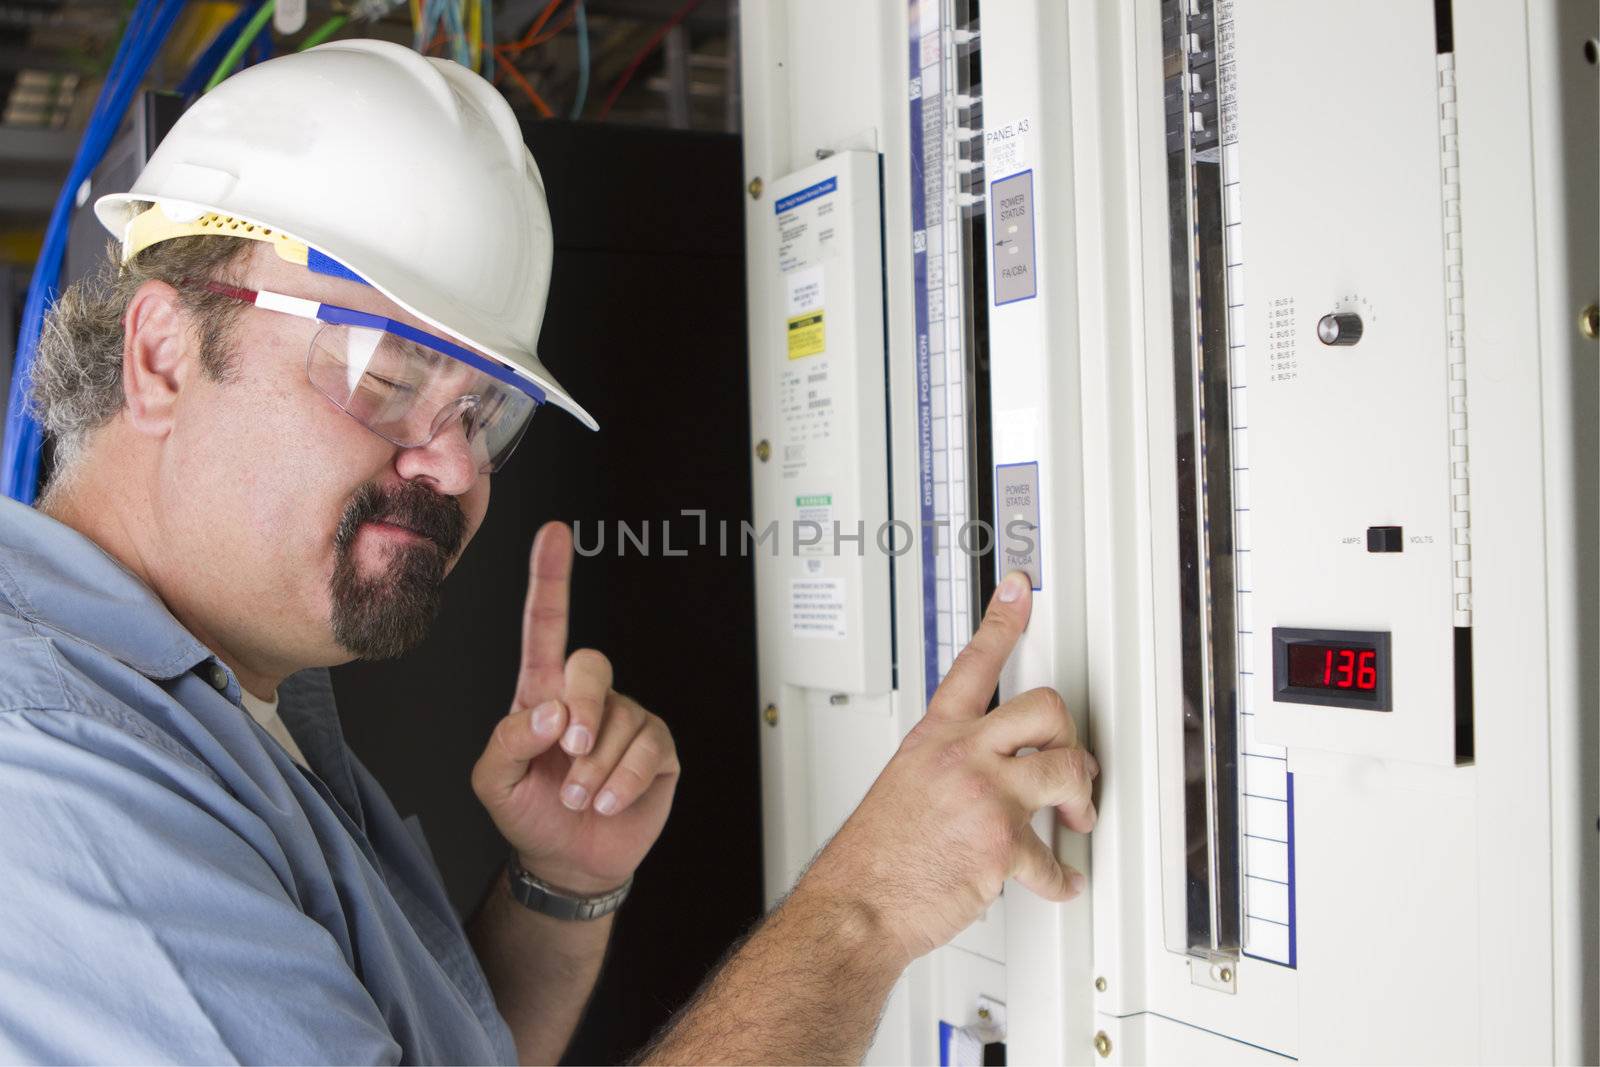 An engineer try to remember the volage levels infront of a power panel, one minute, don't disturb him.